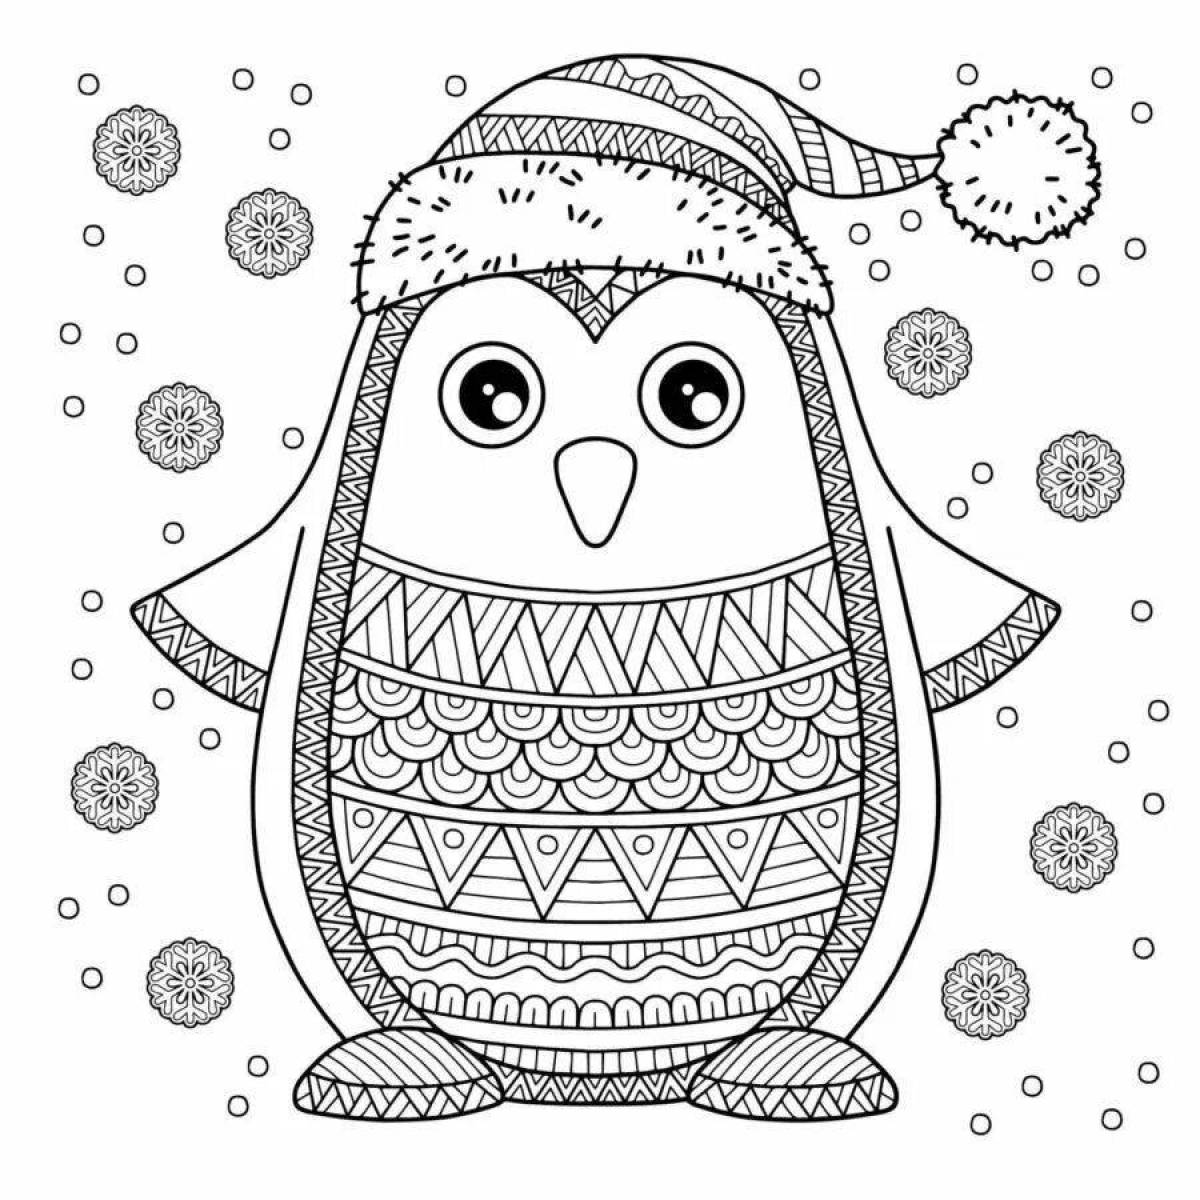 Amazing Christmas penguin coloring book